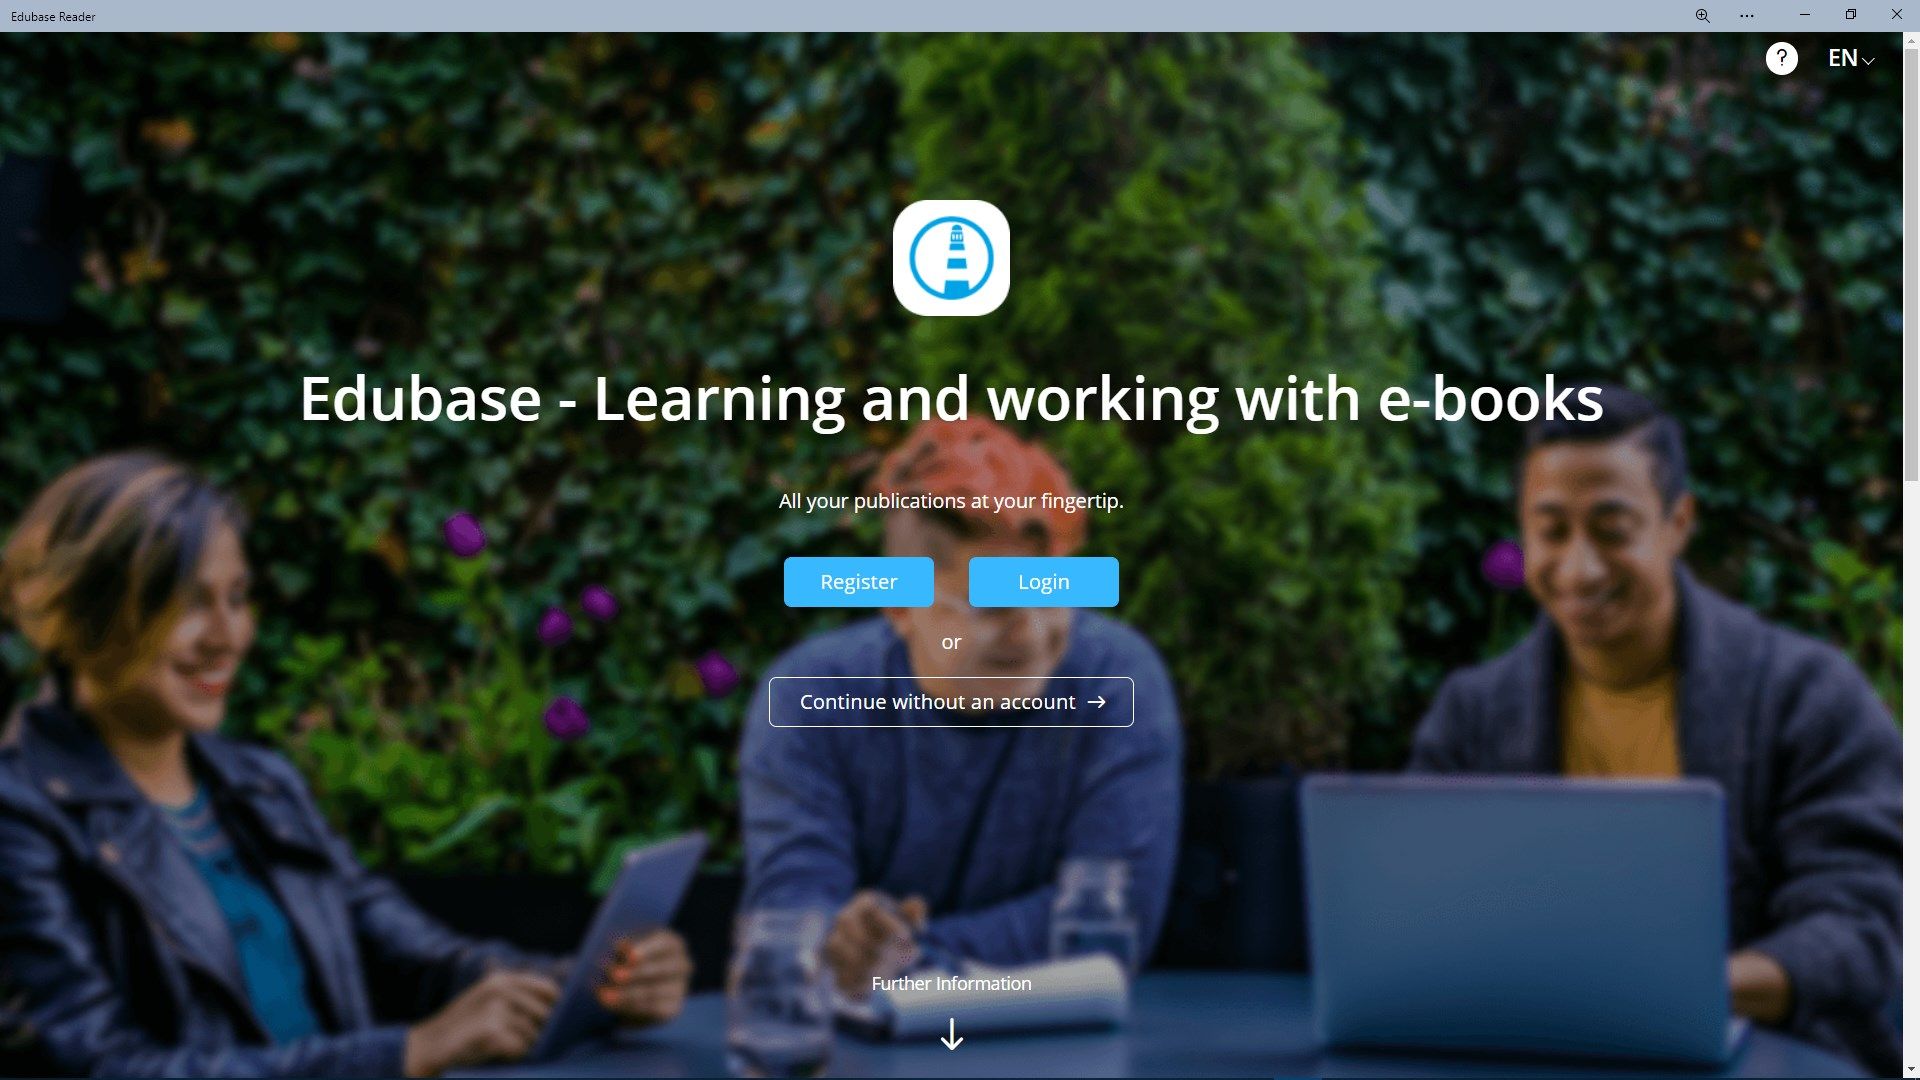 Edubase can be used without registration. Yet, a free account allows access to all functions.